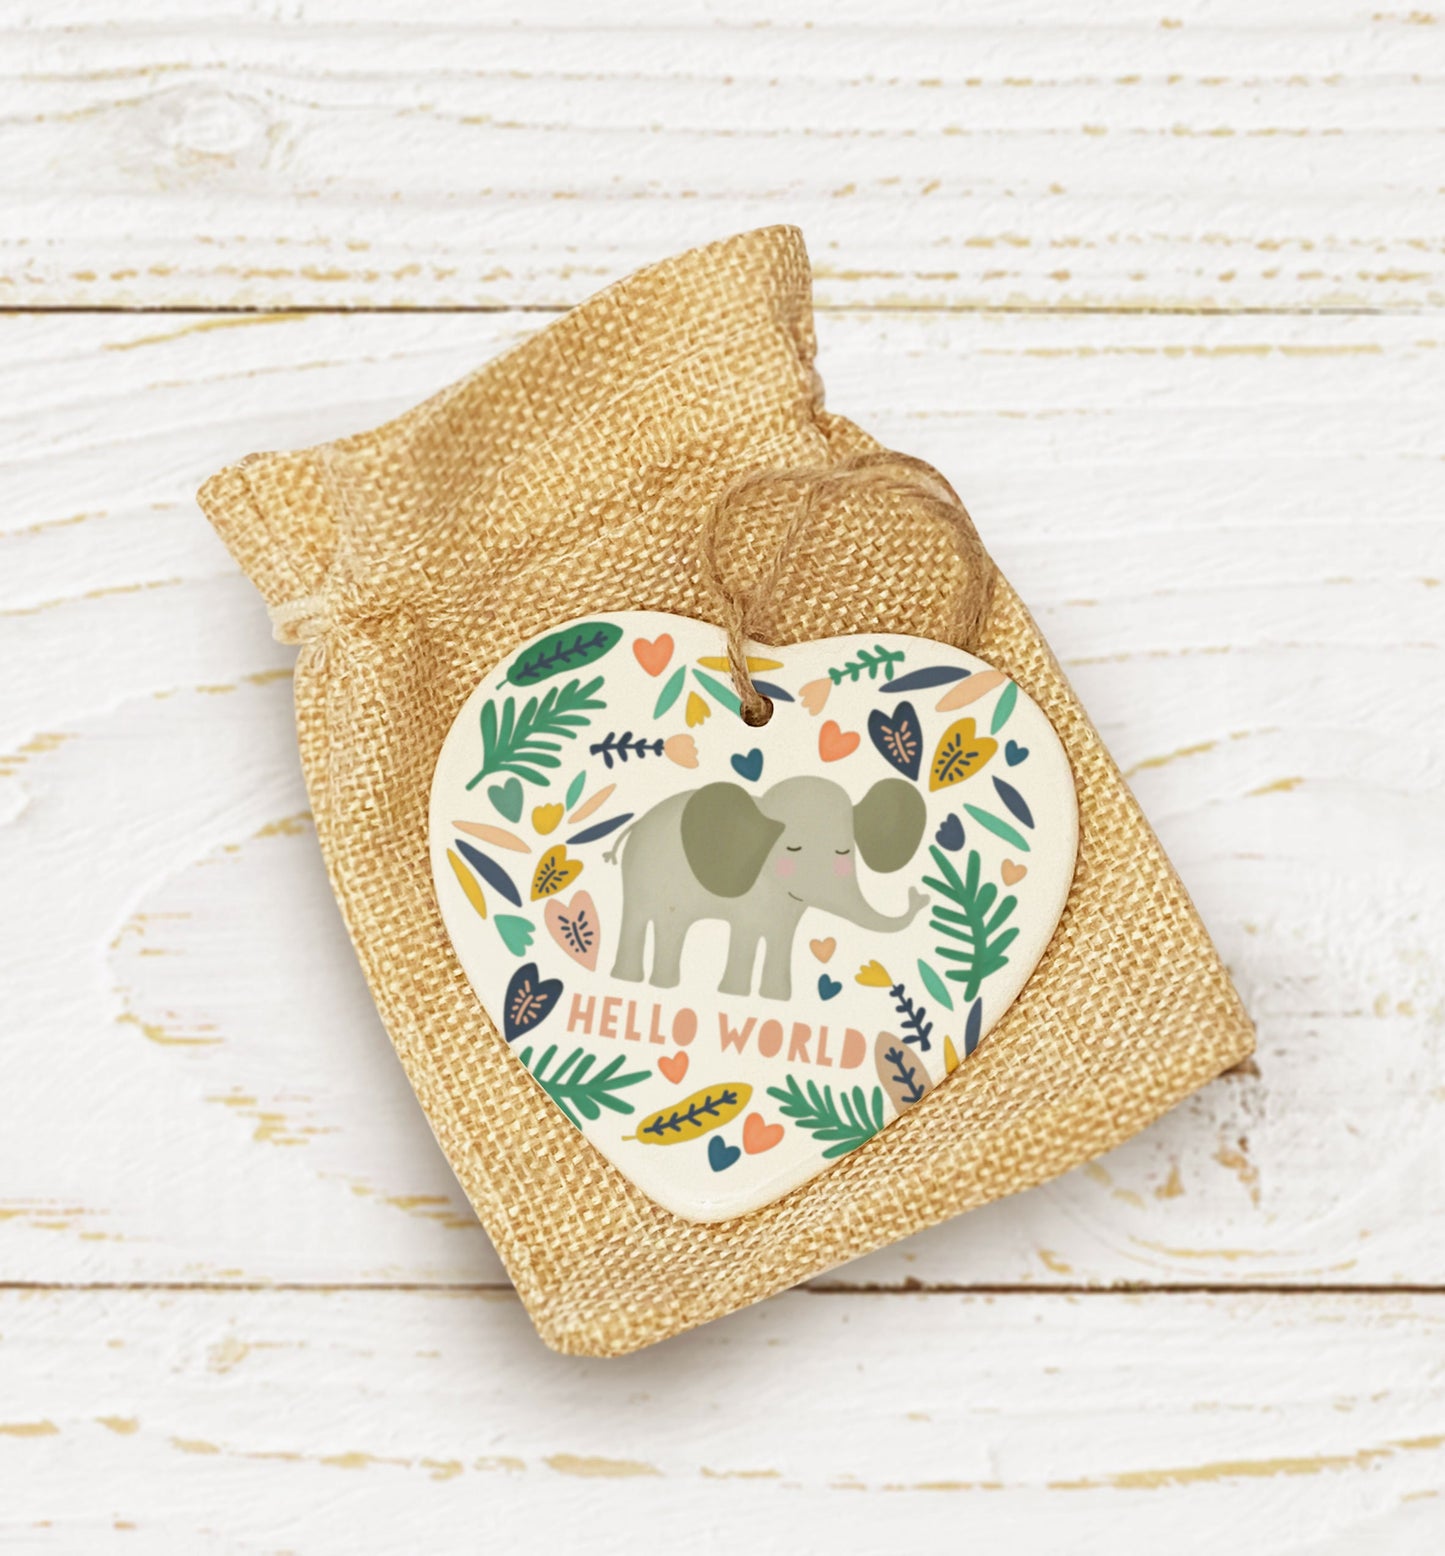 Hello World Elephant Hanging Heart. Cute Elephant Decoration. New Baby Decoration. Welcome to the world. 1st Birthday Gift. Ceramic ornament